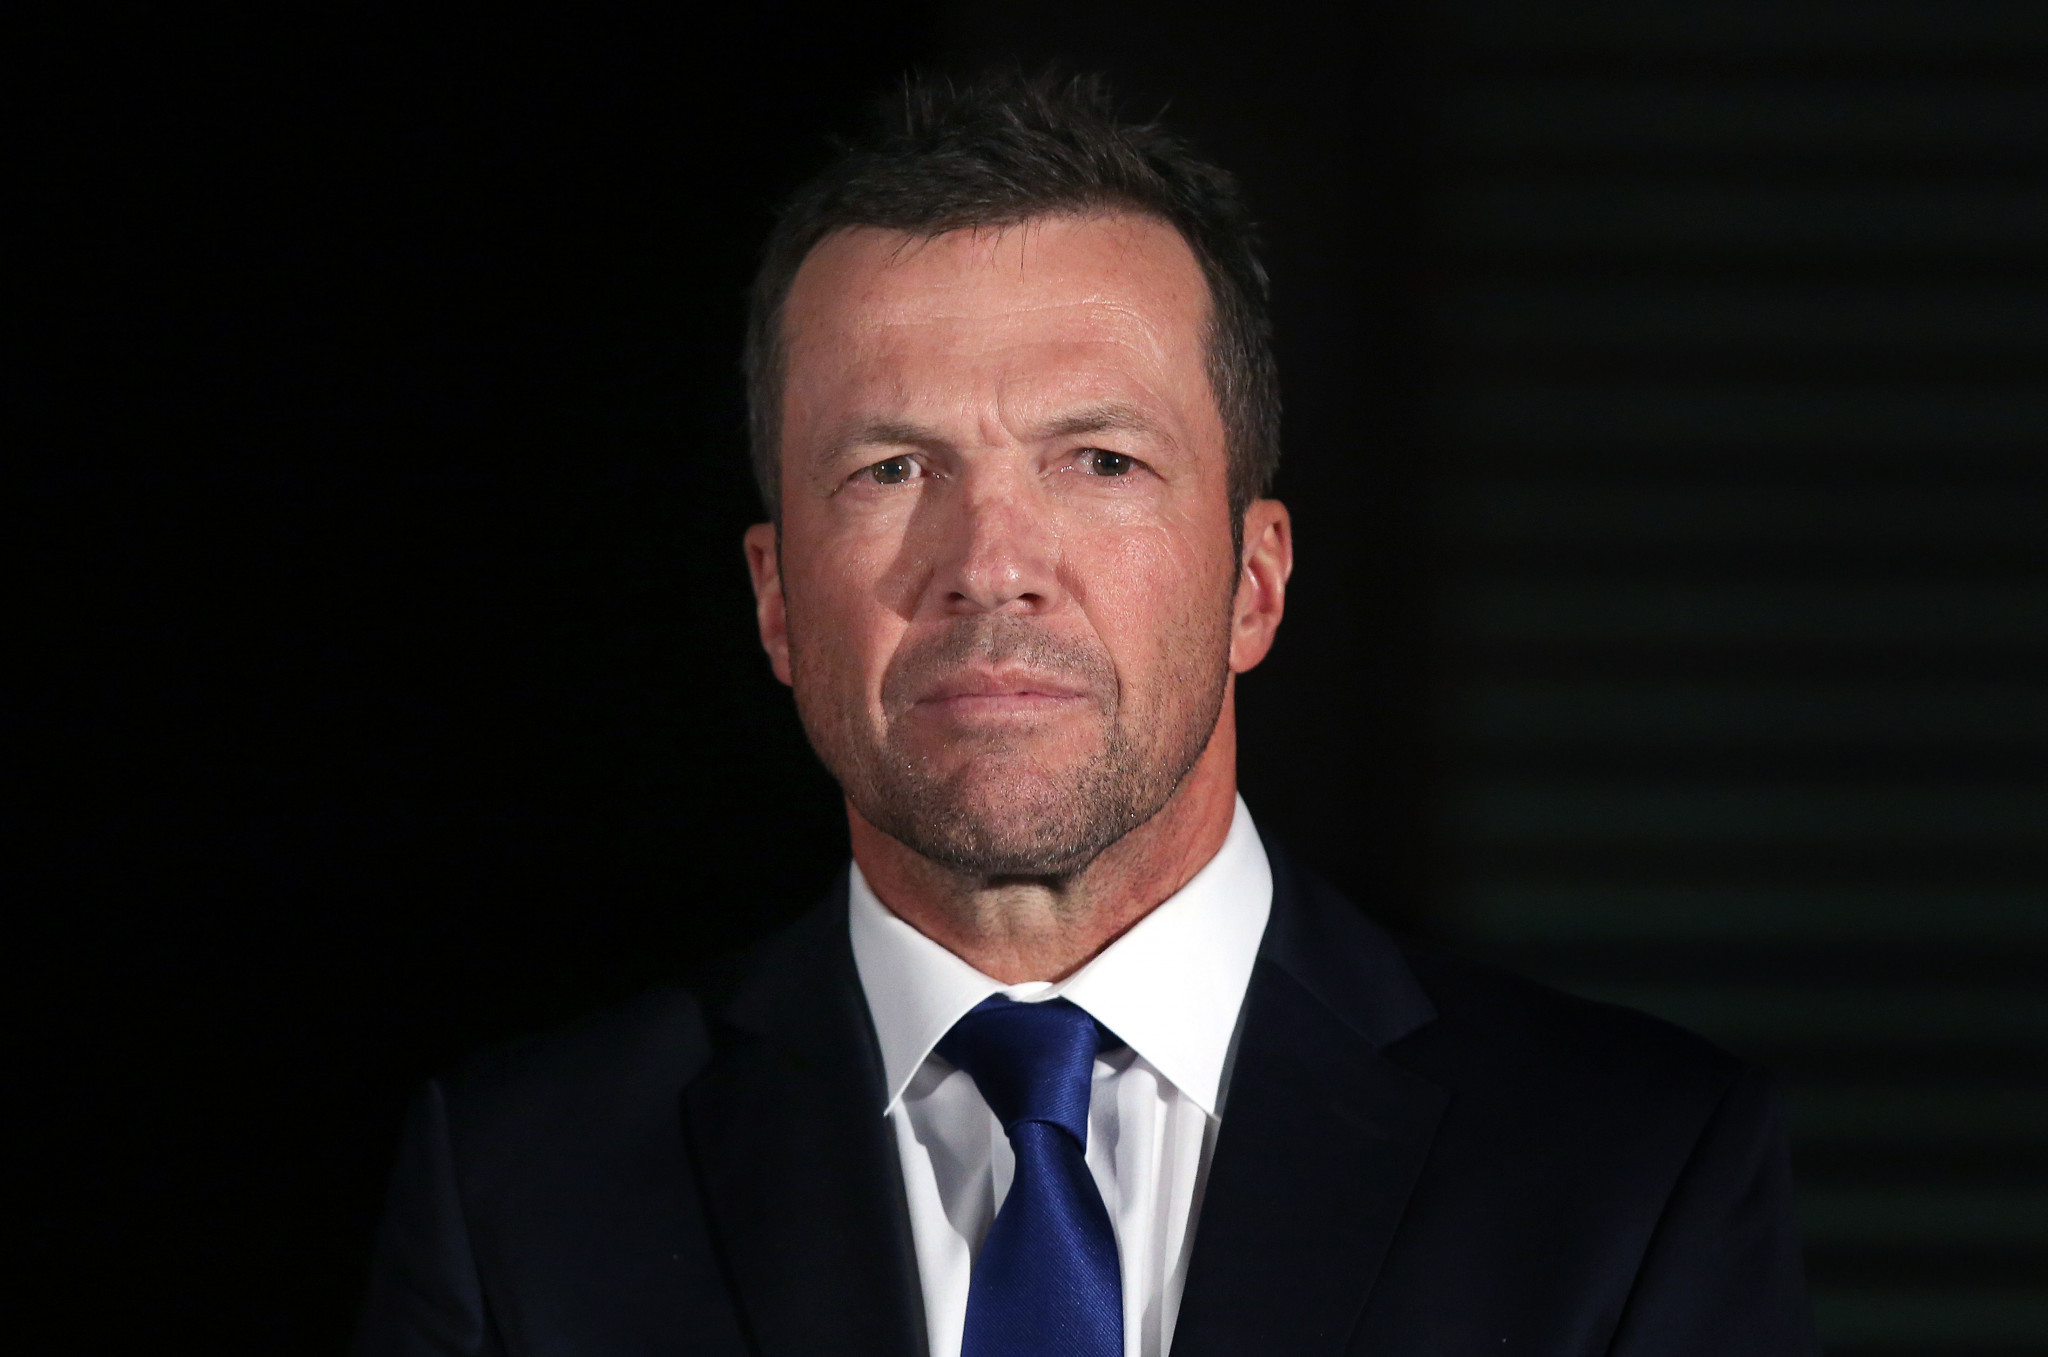 FIFA World Cup winner Lothar Matthäus has been unveiled as an ambassador of Morocco’s bid for the 2026 edition of football’s showpiece event ©Getty Images